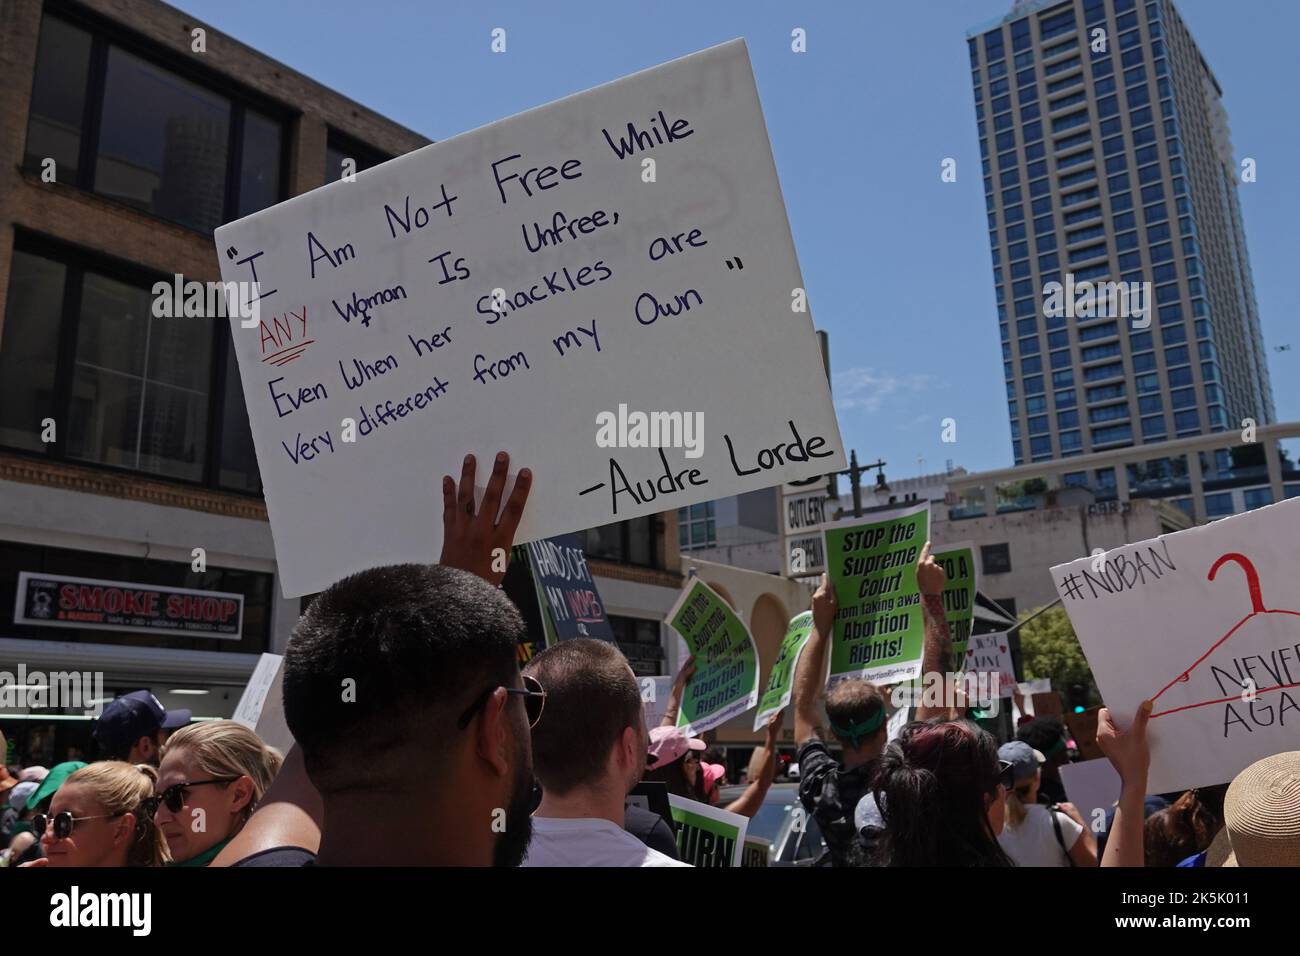 Los Angeles, CA / USA - May 14, 2022: Demonstrators in support of womens reproductive rights assemble and hold signs in downtown L.A. Stock Photo